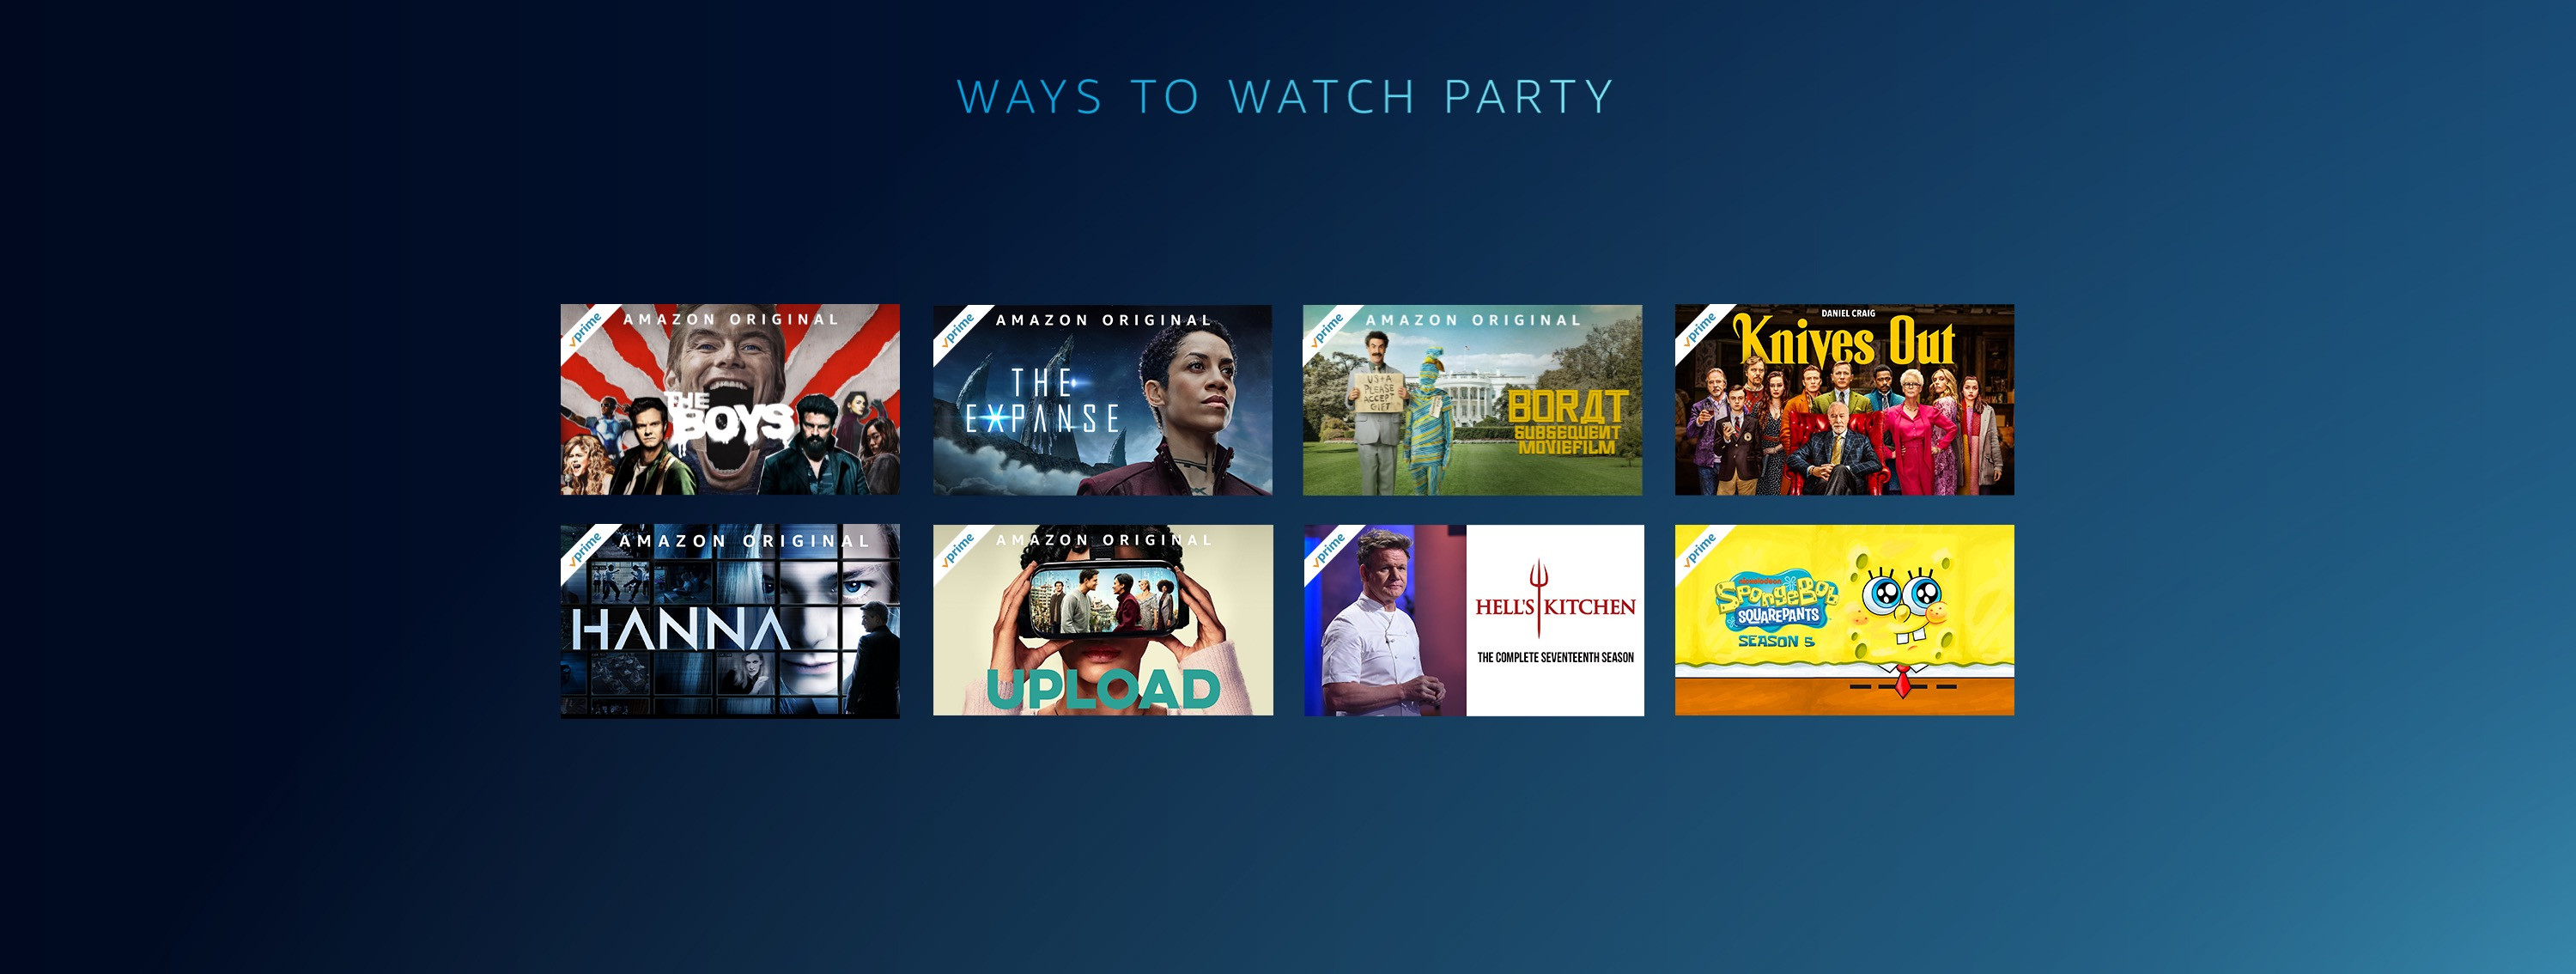 Prime Video watch party now available on smart TVs